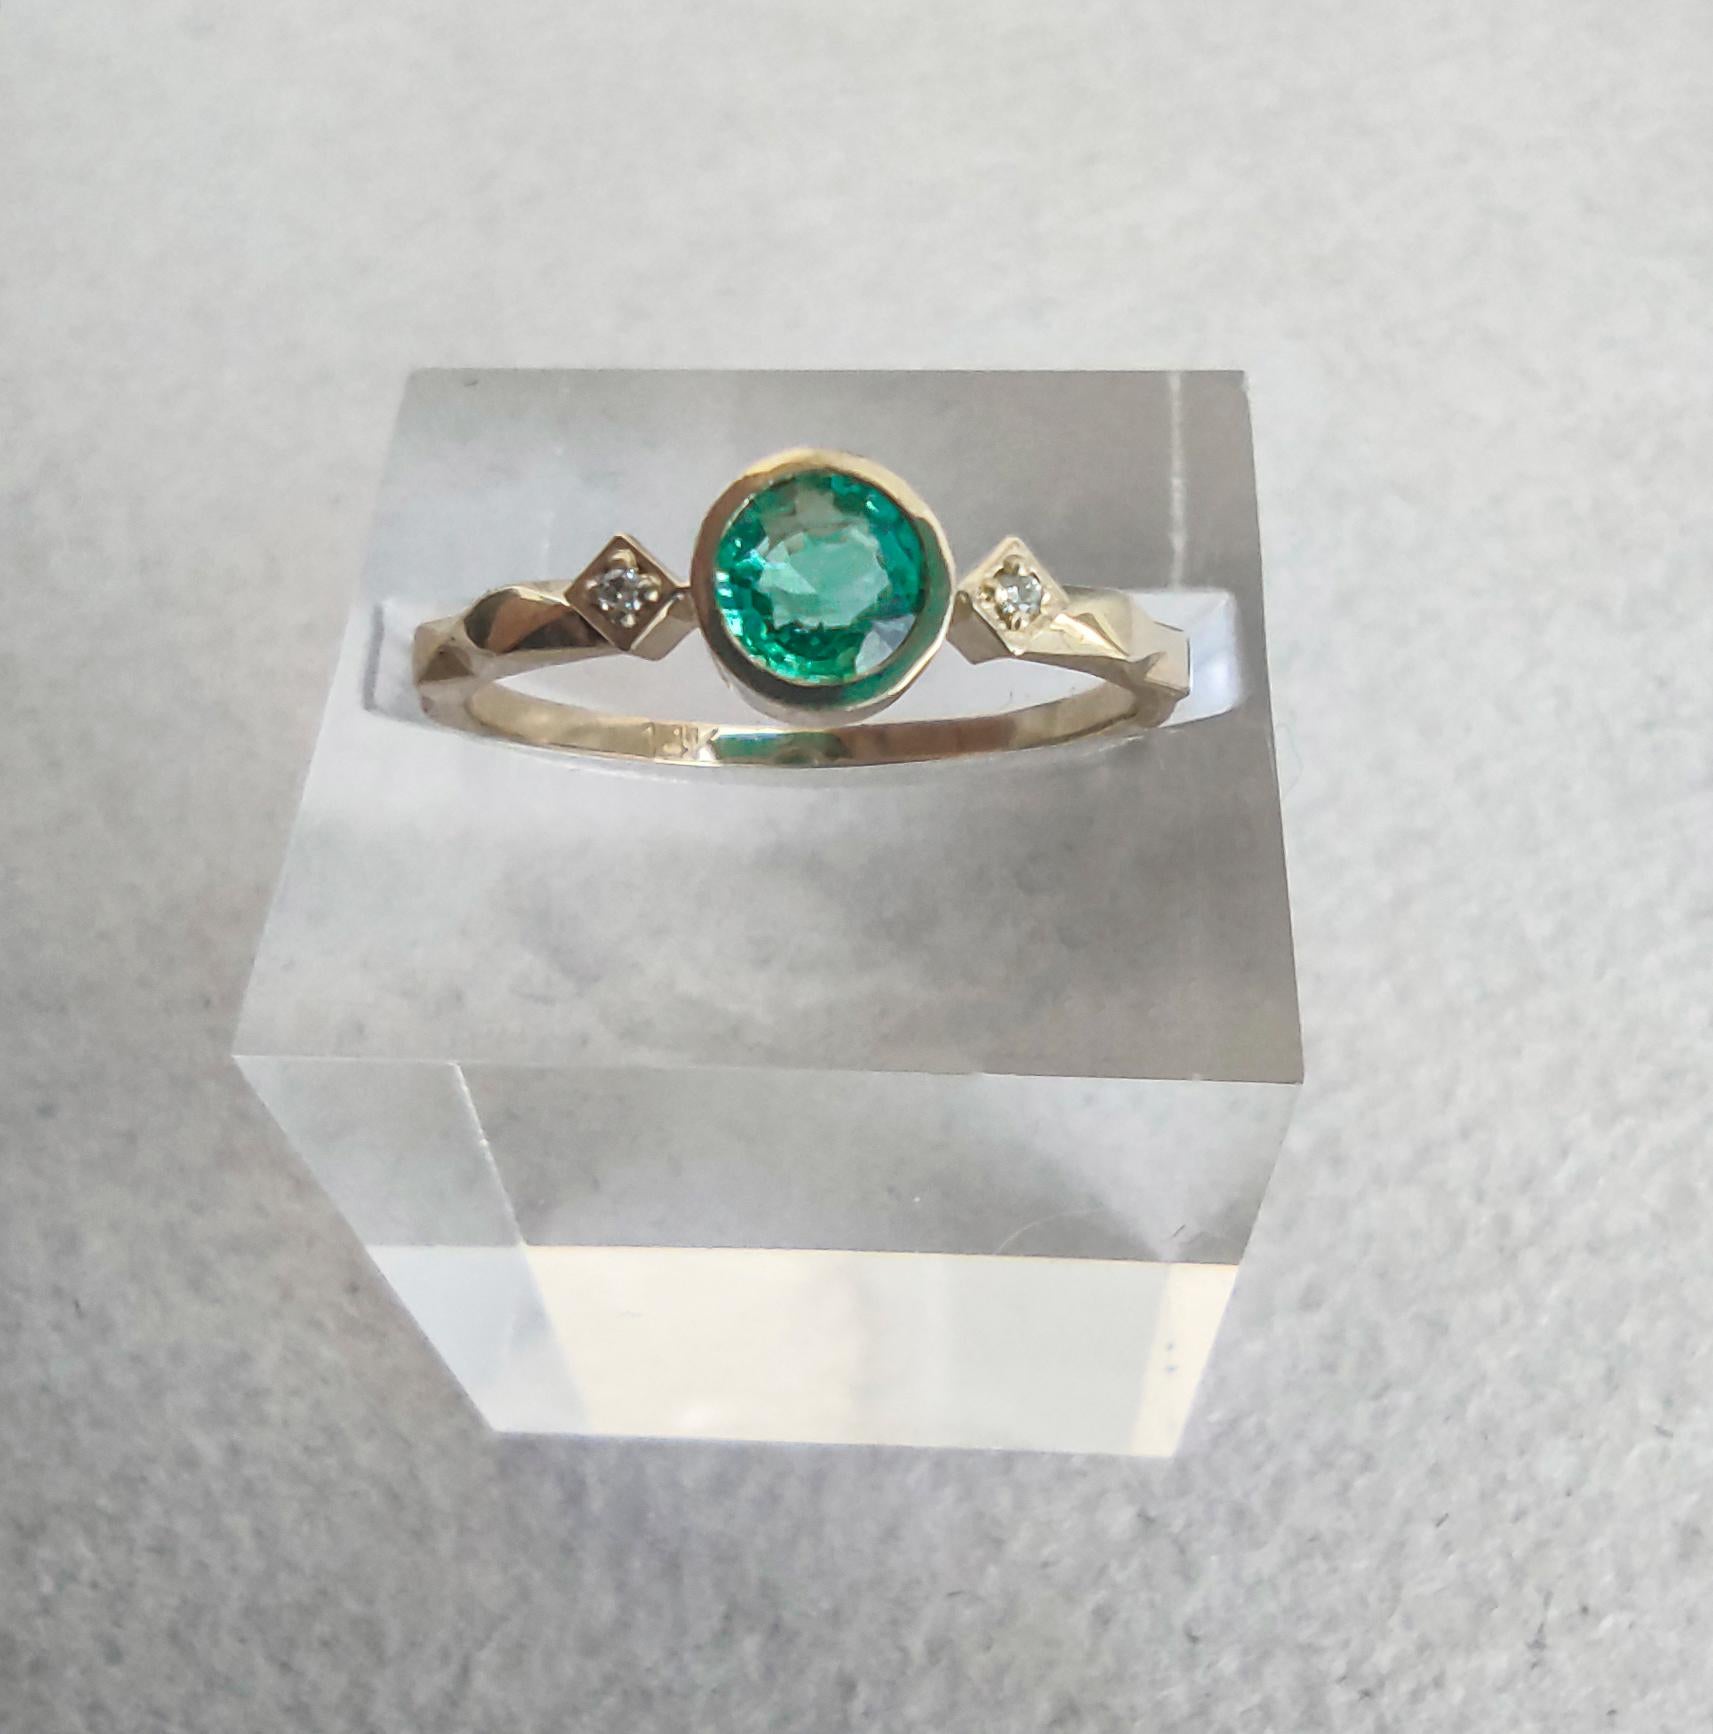 For Sale:  Round Emerald Ring in 14k Gold, Genuine Emerald Ring 6